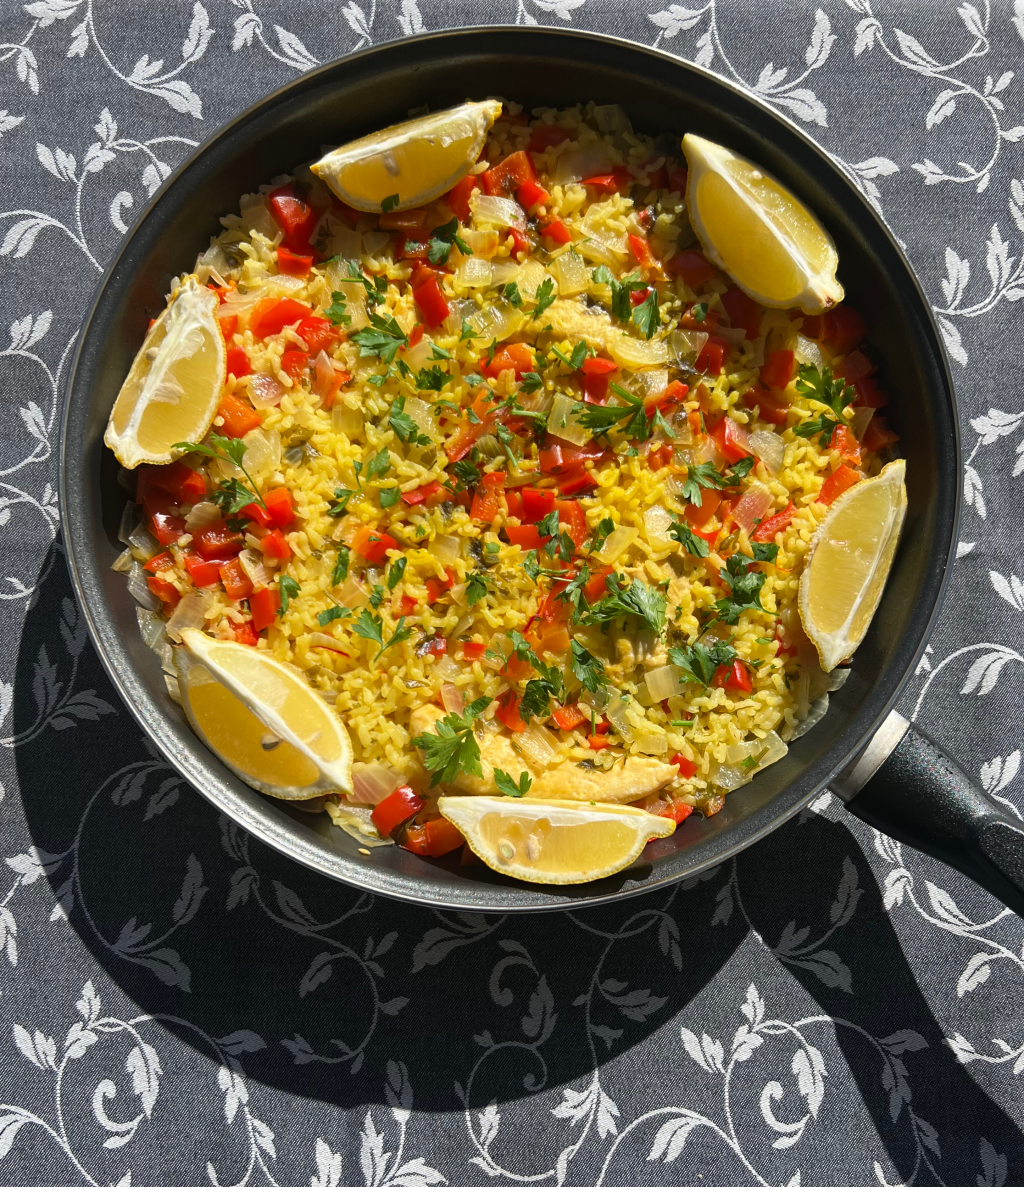 Exploring Barcelona and Cooking an Easy Chicken Paella